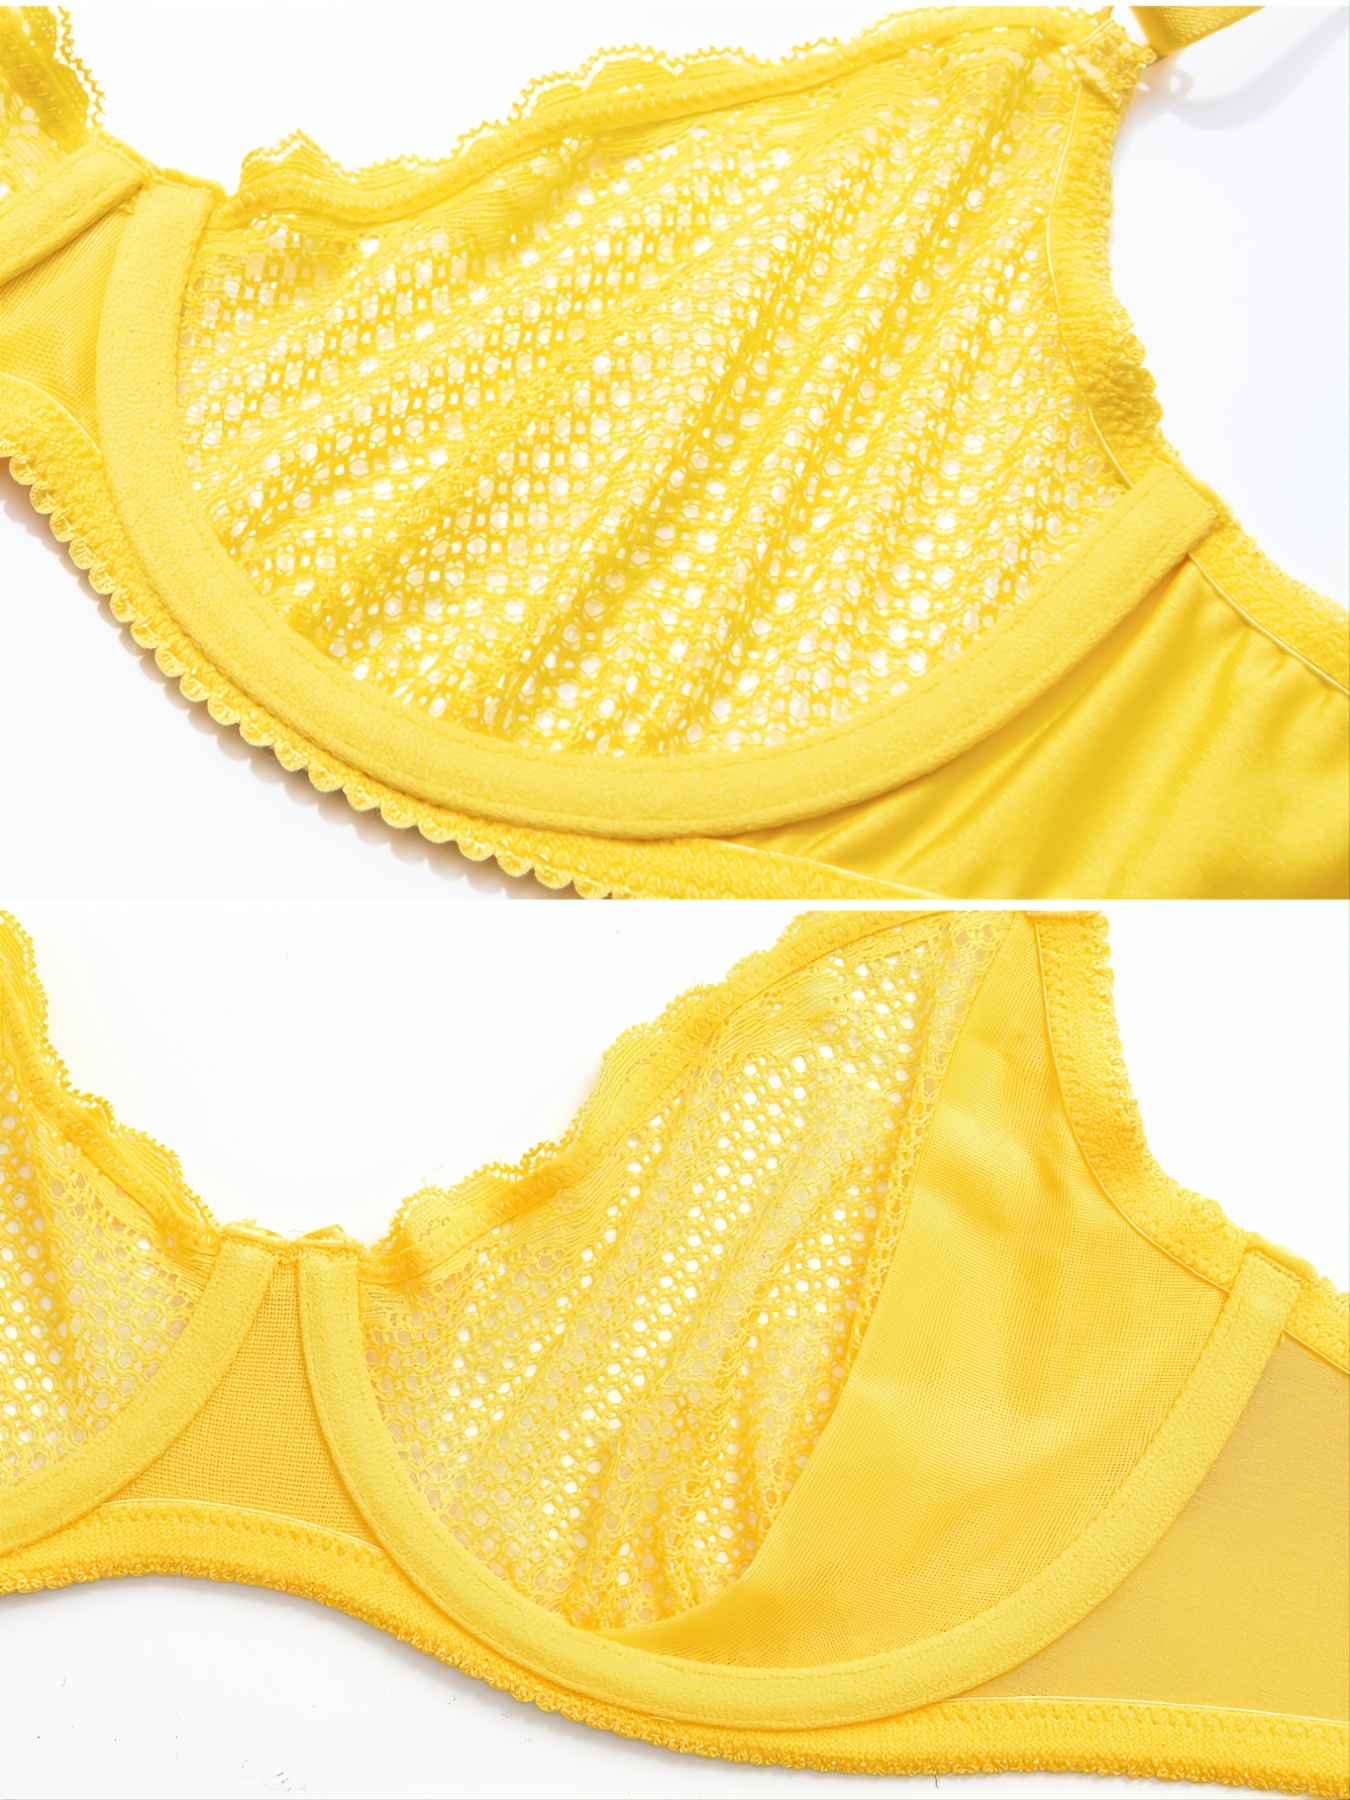 Bombshell Broderie Unlined Lace Balconette Bra in Yellow